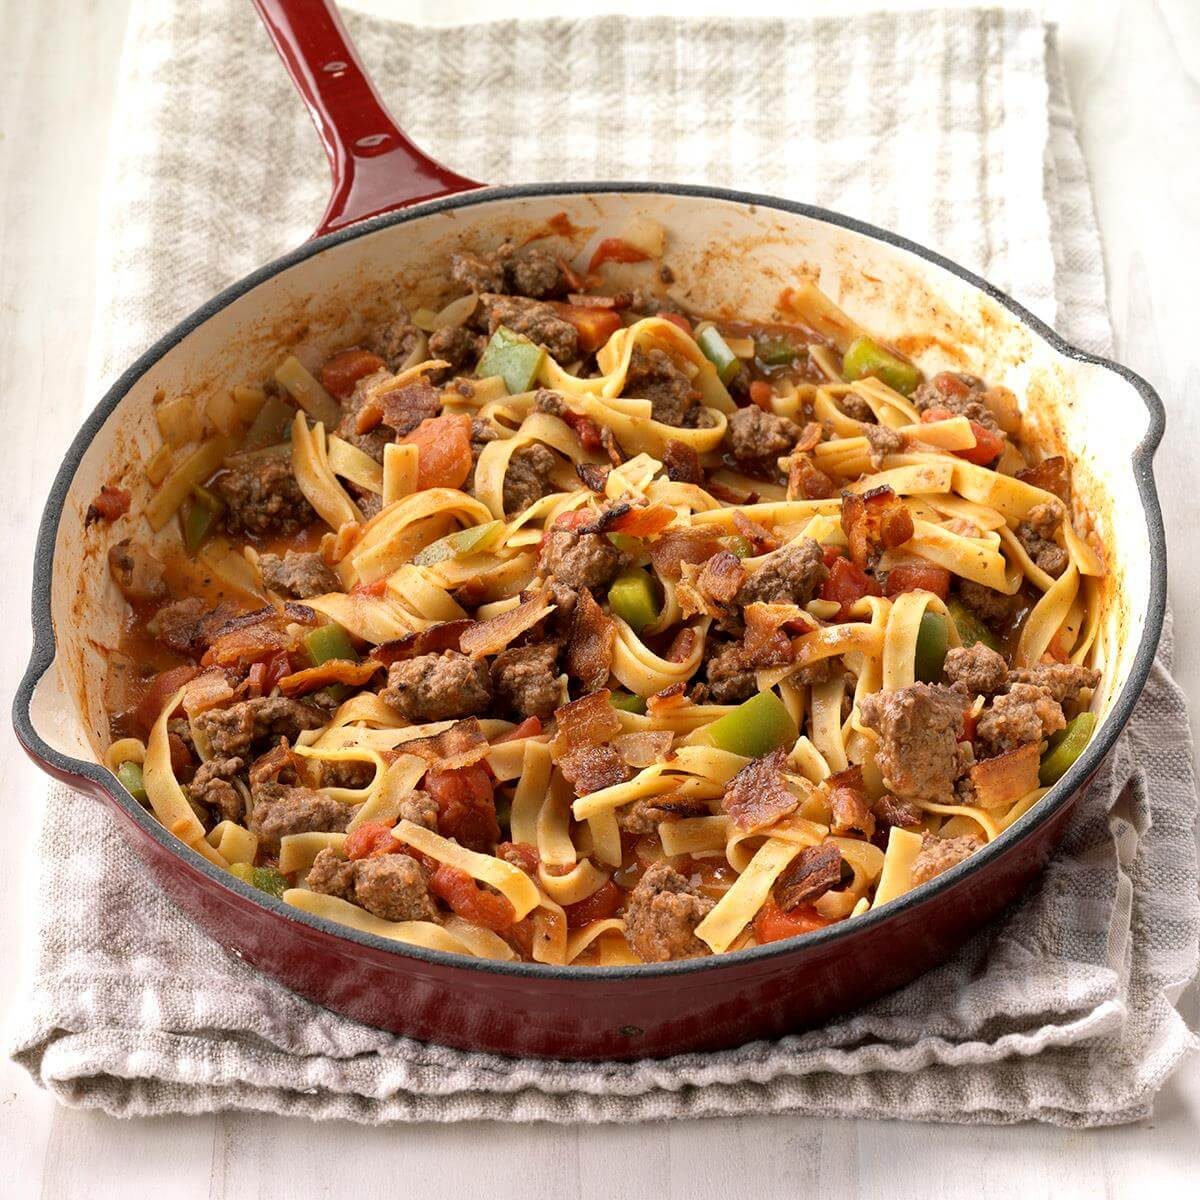 https://www.tasteofhome.com/wp-content/uploads/2017/10/Spanish-Noodles-and-Ground-Beef_EXPS_SDFM18_42886_C10_10_5b.jpg?fit=700%2C1024